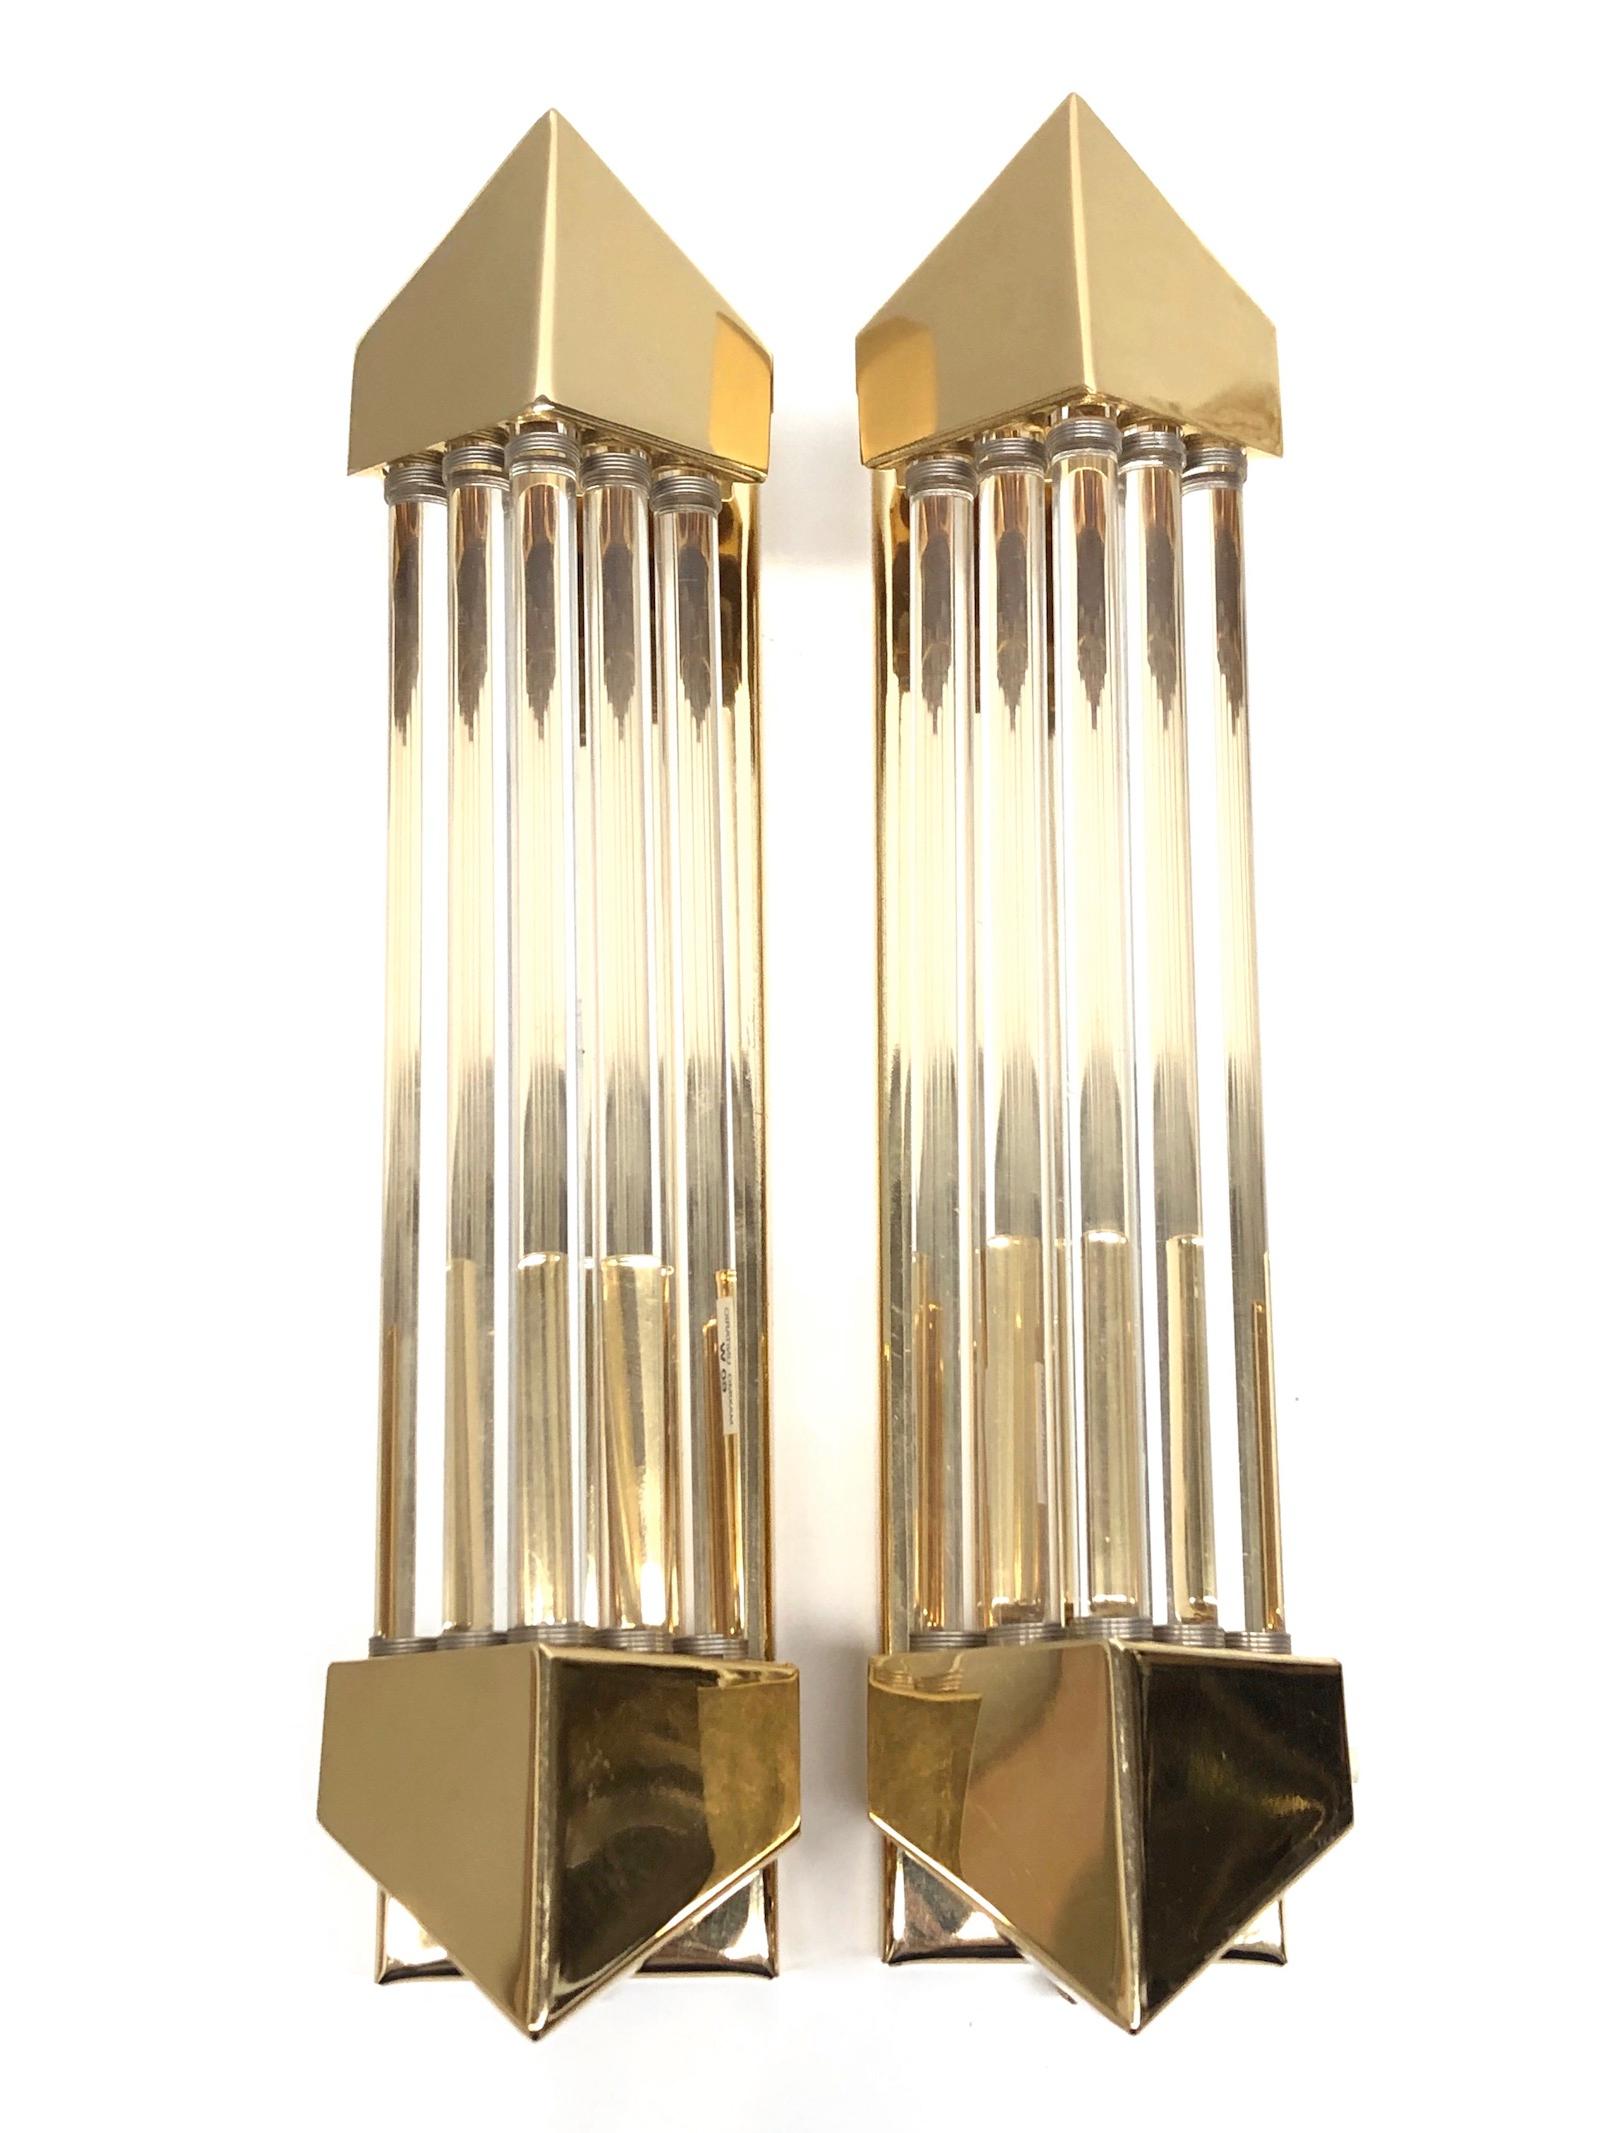 A stunning pair of Rod wall sconces made by Honsel Leuchten Germany. Each with angled brass ends and a single brass wall plate with a solo socket and mount make for a beautiful wall light. Easy to mount and fantastic to look at. The fixture requires